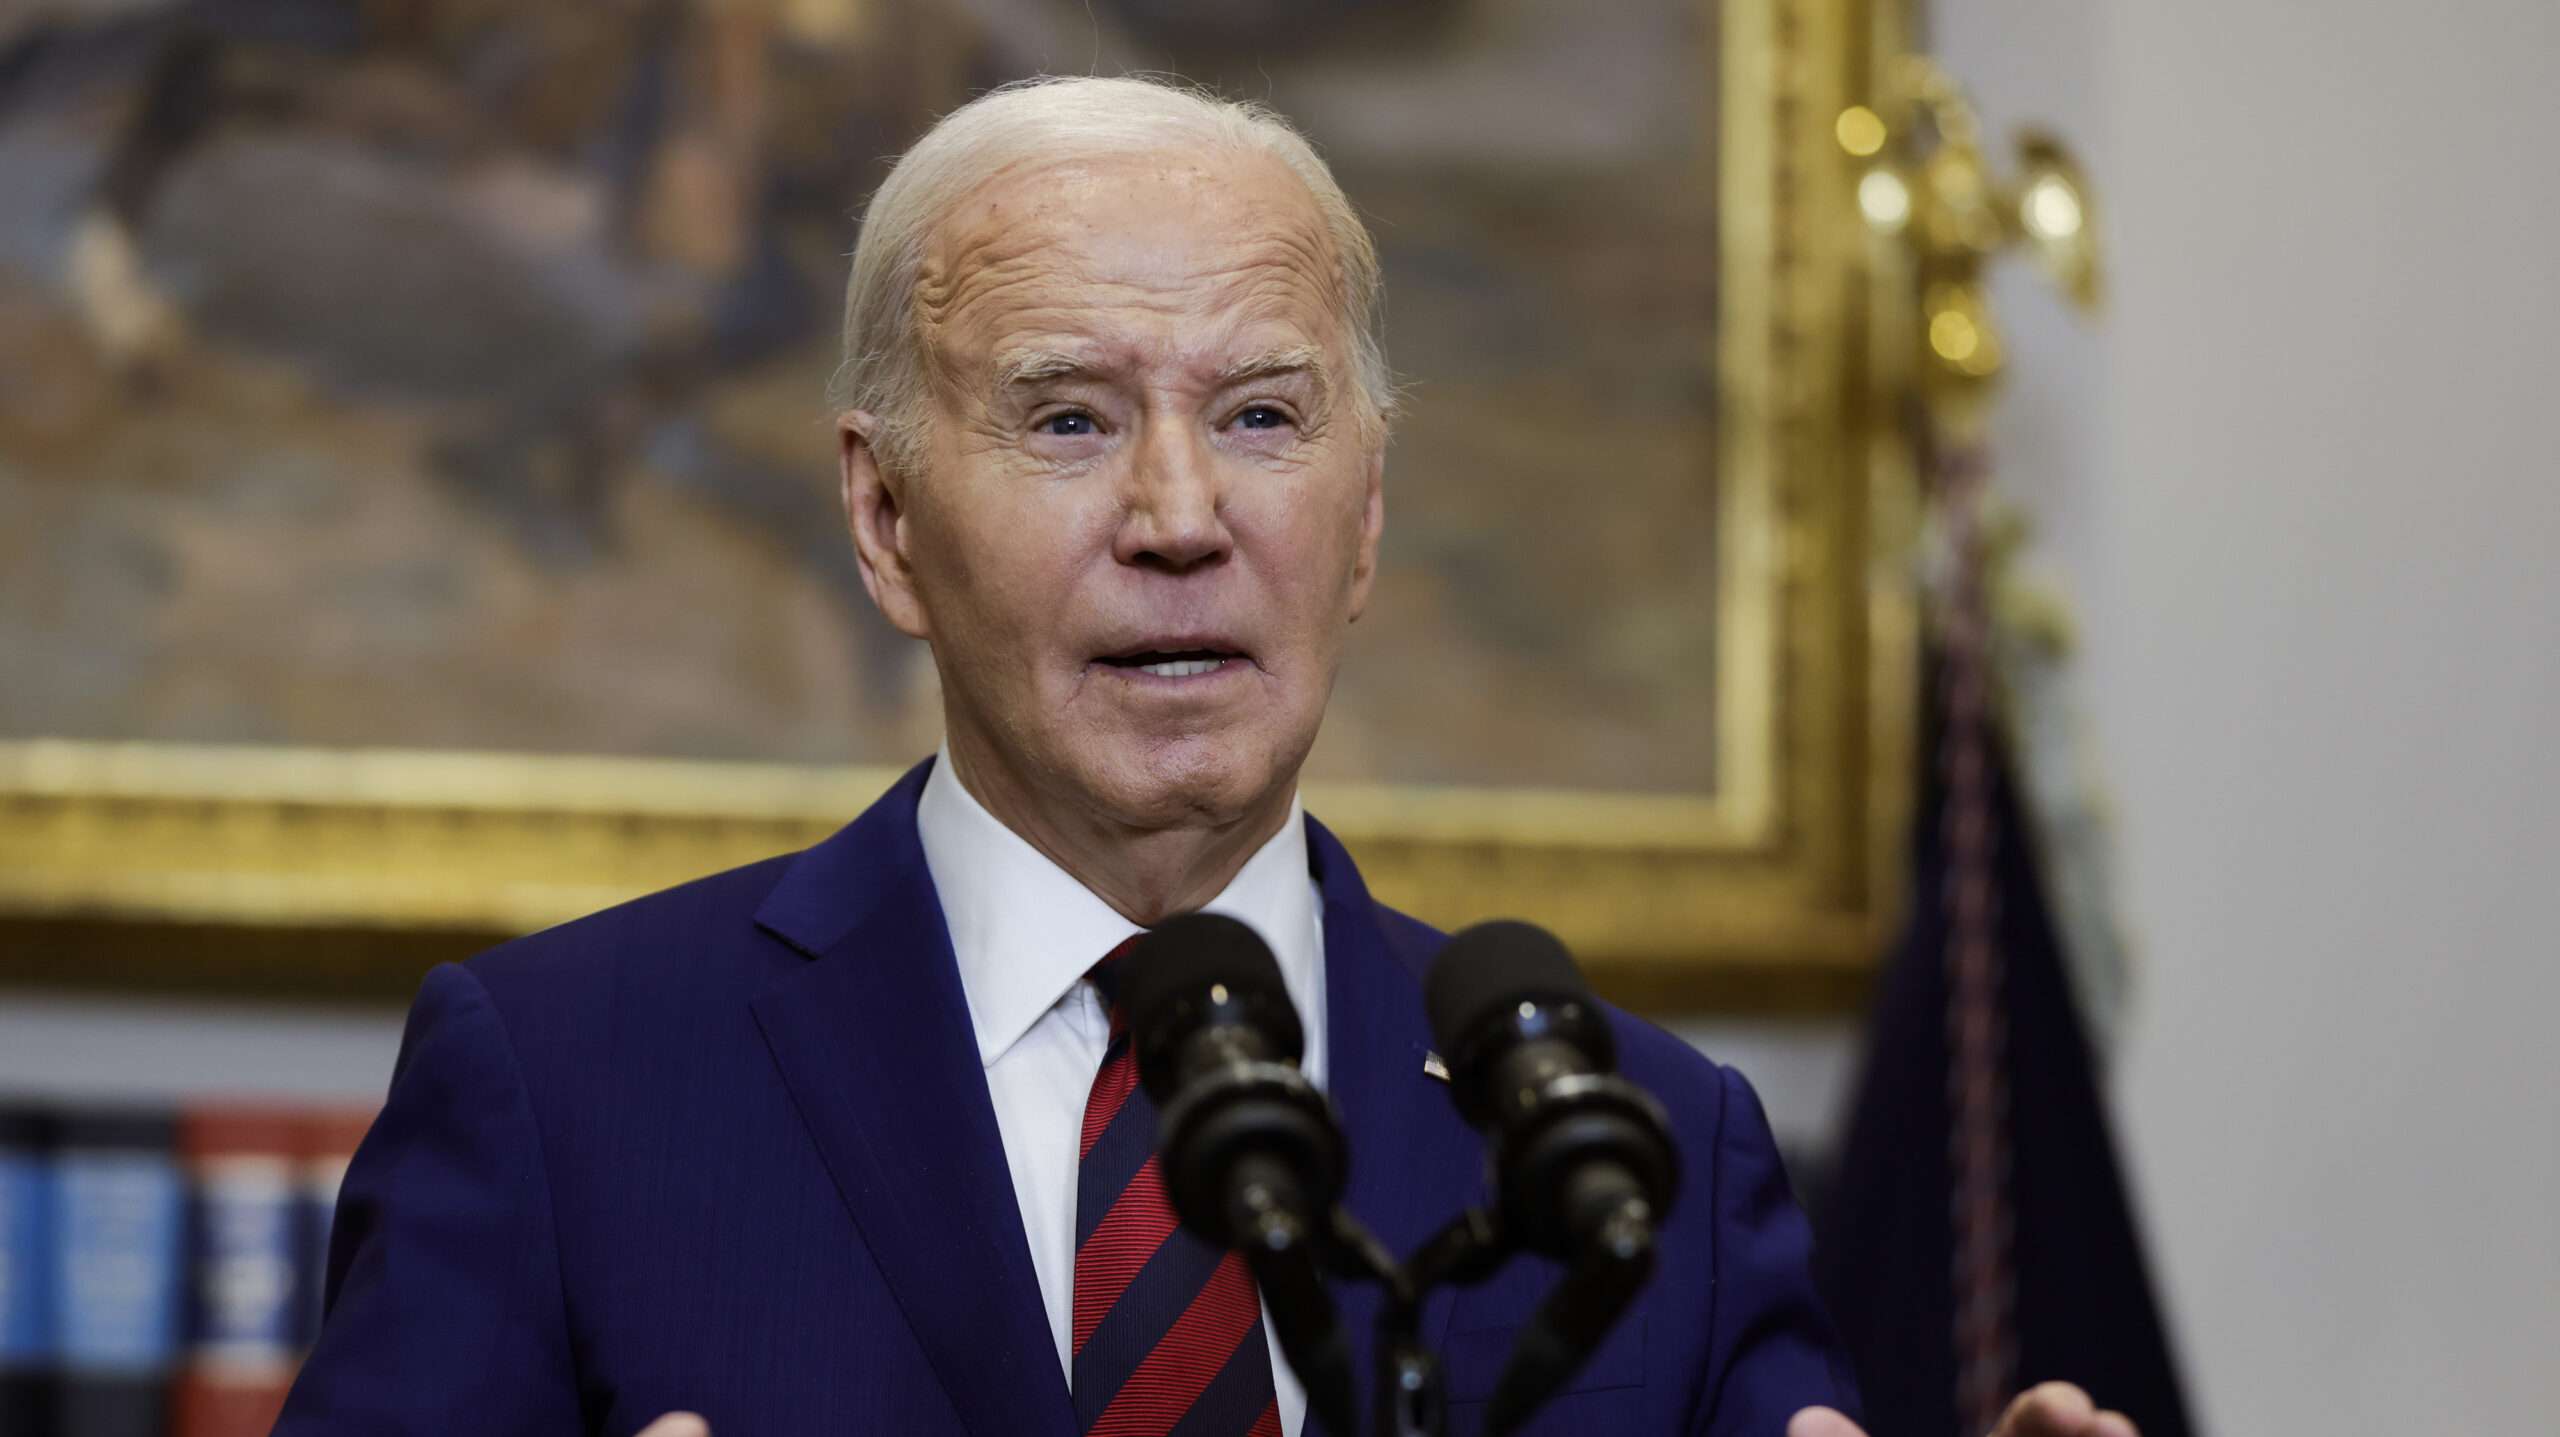 Most Americans aren't buying Biden's misleading narrative that the economy is getting better